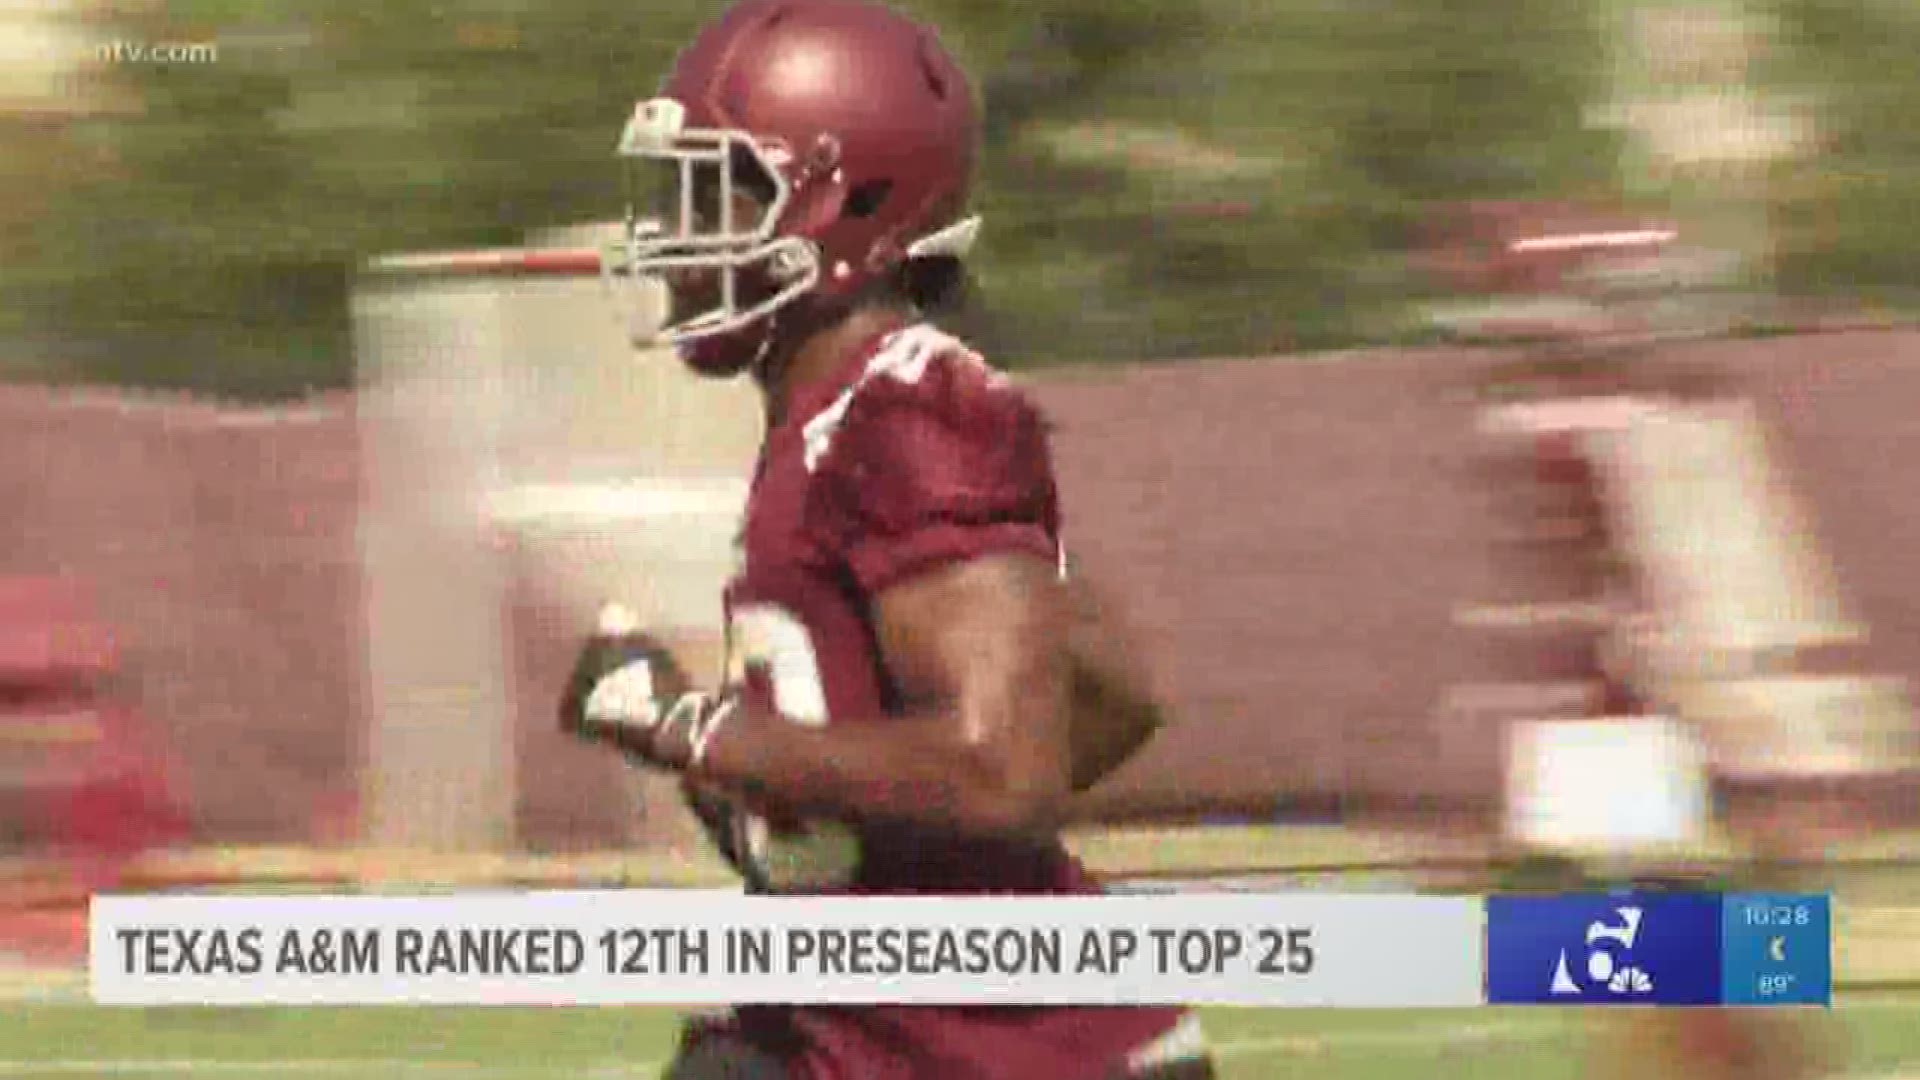 It's the first time the Aggies have earned a preseason ranking from the AP since the 2014 season.